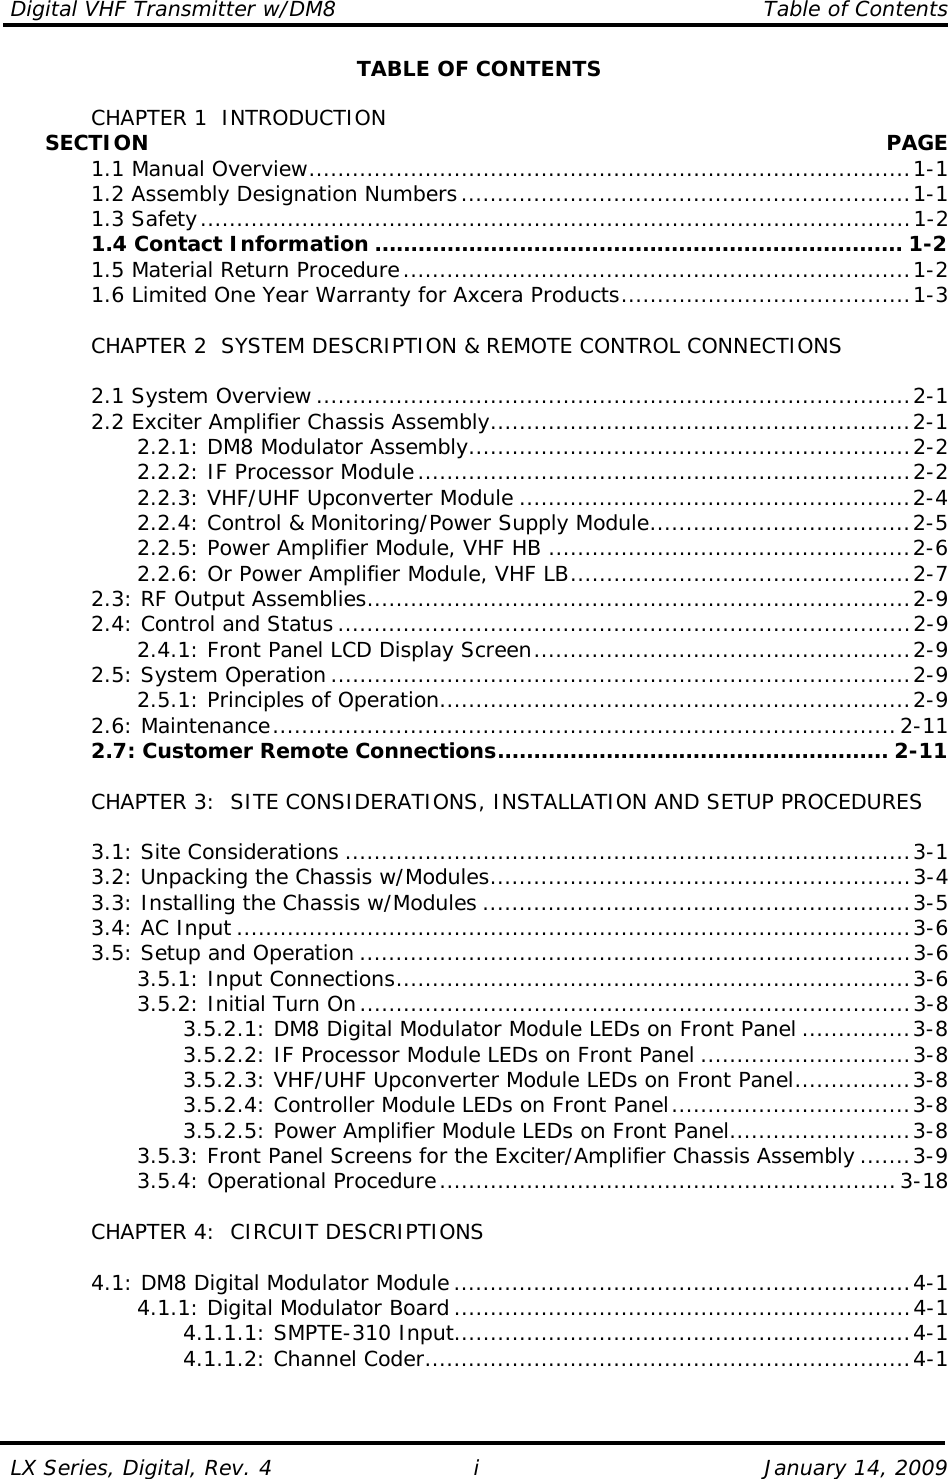 Digital VHF Transmitter w/DM8    Table of Contents  LX Series, Digital, Rev. 4    January 14, 2009 iTABLE OF CONTENTS    CHAPTER 1  INTRODUCTION      SECTION   PAGE  1.1 Manual Overview...................................................................................1-1   1.2 Assembly Designation Numbers..............................................................1-1  1.3 Safety..................................................................................................1-2  1.4 Contact Information ......................................................................... 1-2   1.5 Material Return Procedure......................................................................1-2   1.6 Limited One Year Warranty for Axcera Products........................................1-3    CHAPTER 2  SYSTEM DESCRIPTION &amp; REMOTE CONTROL CONNECTIONS   2.1 System Overview ..................................................................................2-1   2.2 Exciter Amplifier Chassis Assembly..........................................................2-1     2.2.1: DM8 Modulator Assembly.............................................................2-2     2.2.2: IF Processor Module....................................................................2-2     2.2.3: VHF/UHF Upconverter Module ......................................................2-4     2.2.4: Control &amp; Monitoring/Power Supply Module....................................2-5     2.2.5: Power Amplifier Module, VHF HB ..................................................2-6     2.2.6: Or Power Amplifier Module, VHF LB...............................................2-7   2.3: RF Output Assemblies...........................................................................2-9   2.4: Control and Status ...............................................................................2-9     2.4.1: Front Panel LCD Display Screen....................................................2-9  2.5: System Operation ................................................................................2-9     2.5.1: Principles of Operation.................................................................2-9  2.6: Maintenance......................................................................................2-11   2.7: Customer Remote Connections...................................................... 2-11      CHAPTER 3:  SITE CONSIDERATIONS, INSTALLATION AND SETUP PROCEDURES     3.1: Site Considerations ..............................................................................3-1   3.2: Unpacking the Chassis w/Modules..........................................................3-4   3.3: Installing the Chassis w/Modules ...........................................................3-5  3.4: AC Input .............................................................................................3-6   3.5: Setup and Operation ............................................................................3-6     3.5.1: Input Connections.......................................................................3-6     3.5.2: Initial Turn On............................................................................3-8       3.5.2.1: DM8 Digital Modulator Module LEDs on Front Panel ...............3-8       3.5.2.2: IF Processor Module LEDs on Front Panel .............................3-8       3.5.2.3: VHF/UHF Upconverter Module LEDs on Front Panel................3-8       3.5.2.4: Controller Module LEDs on Front Panel.................................3-8       3.5.2.5: Power Amplifier Module LEDs on Front Panel.........................3-8     3.5.3: Front Panel Screens for the Exciter/Amplifier Chassis Assembly .......3-9   3.5.4: Operational Procedure...............................................................3-18    CHAPTER 4:  CIRCUIT DESCRIPTIONS    4.1: DM8 Digital Modulator Module ...............................................................4-1     4.1.1: Digital Modulator Board ...............................................................4-1     4.1.1.1: SMPTE-310 Input...............................................................4-1     4.1.1.2: Channel Coder...................................................................4-1   